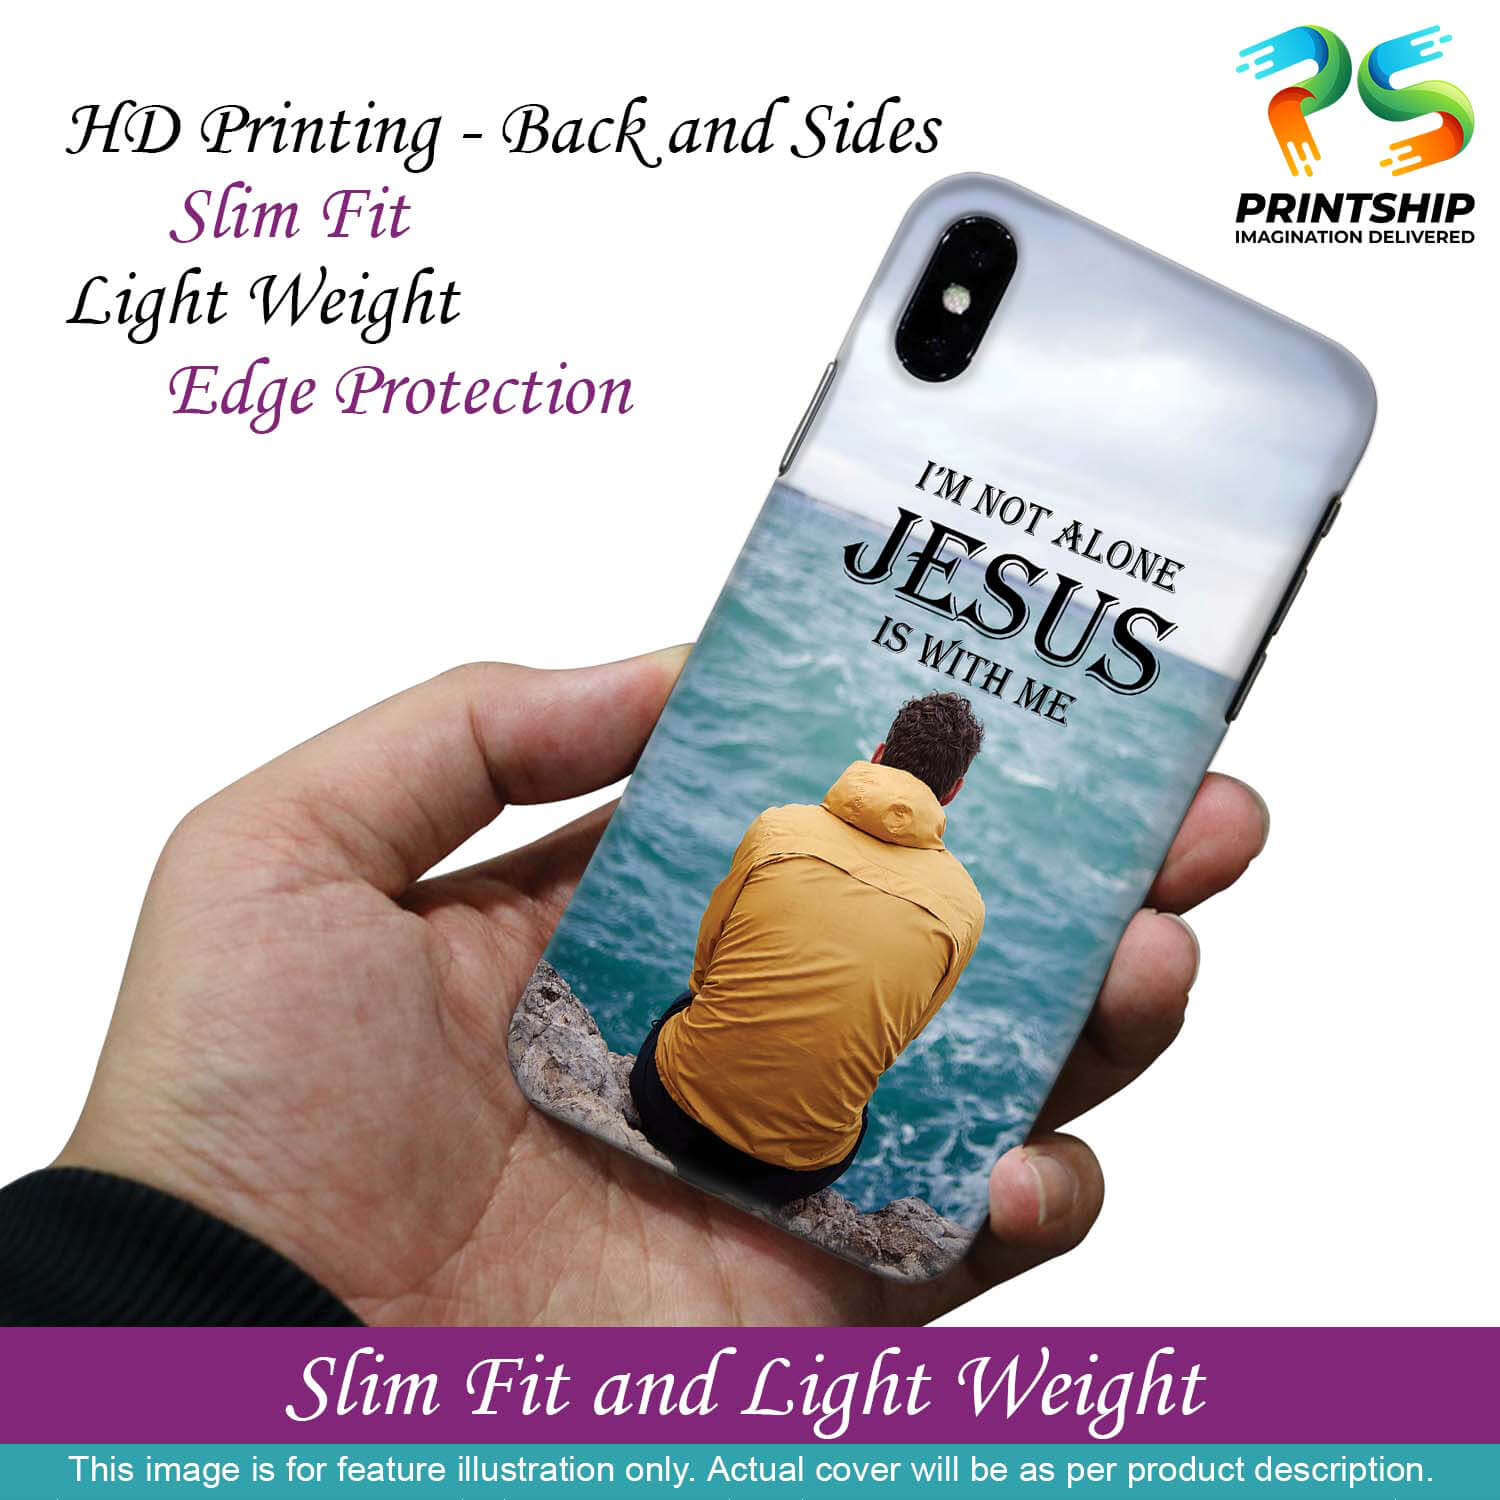 W0007-Jesus is with Me Back Cover for Xiaomi Redmi Note 11 4G